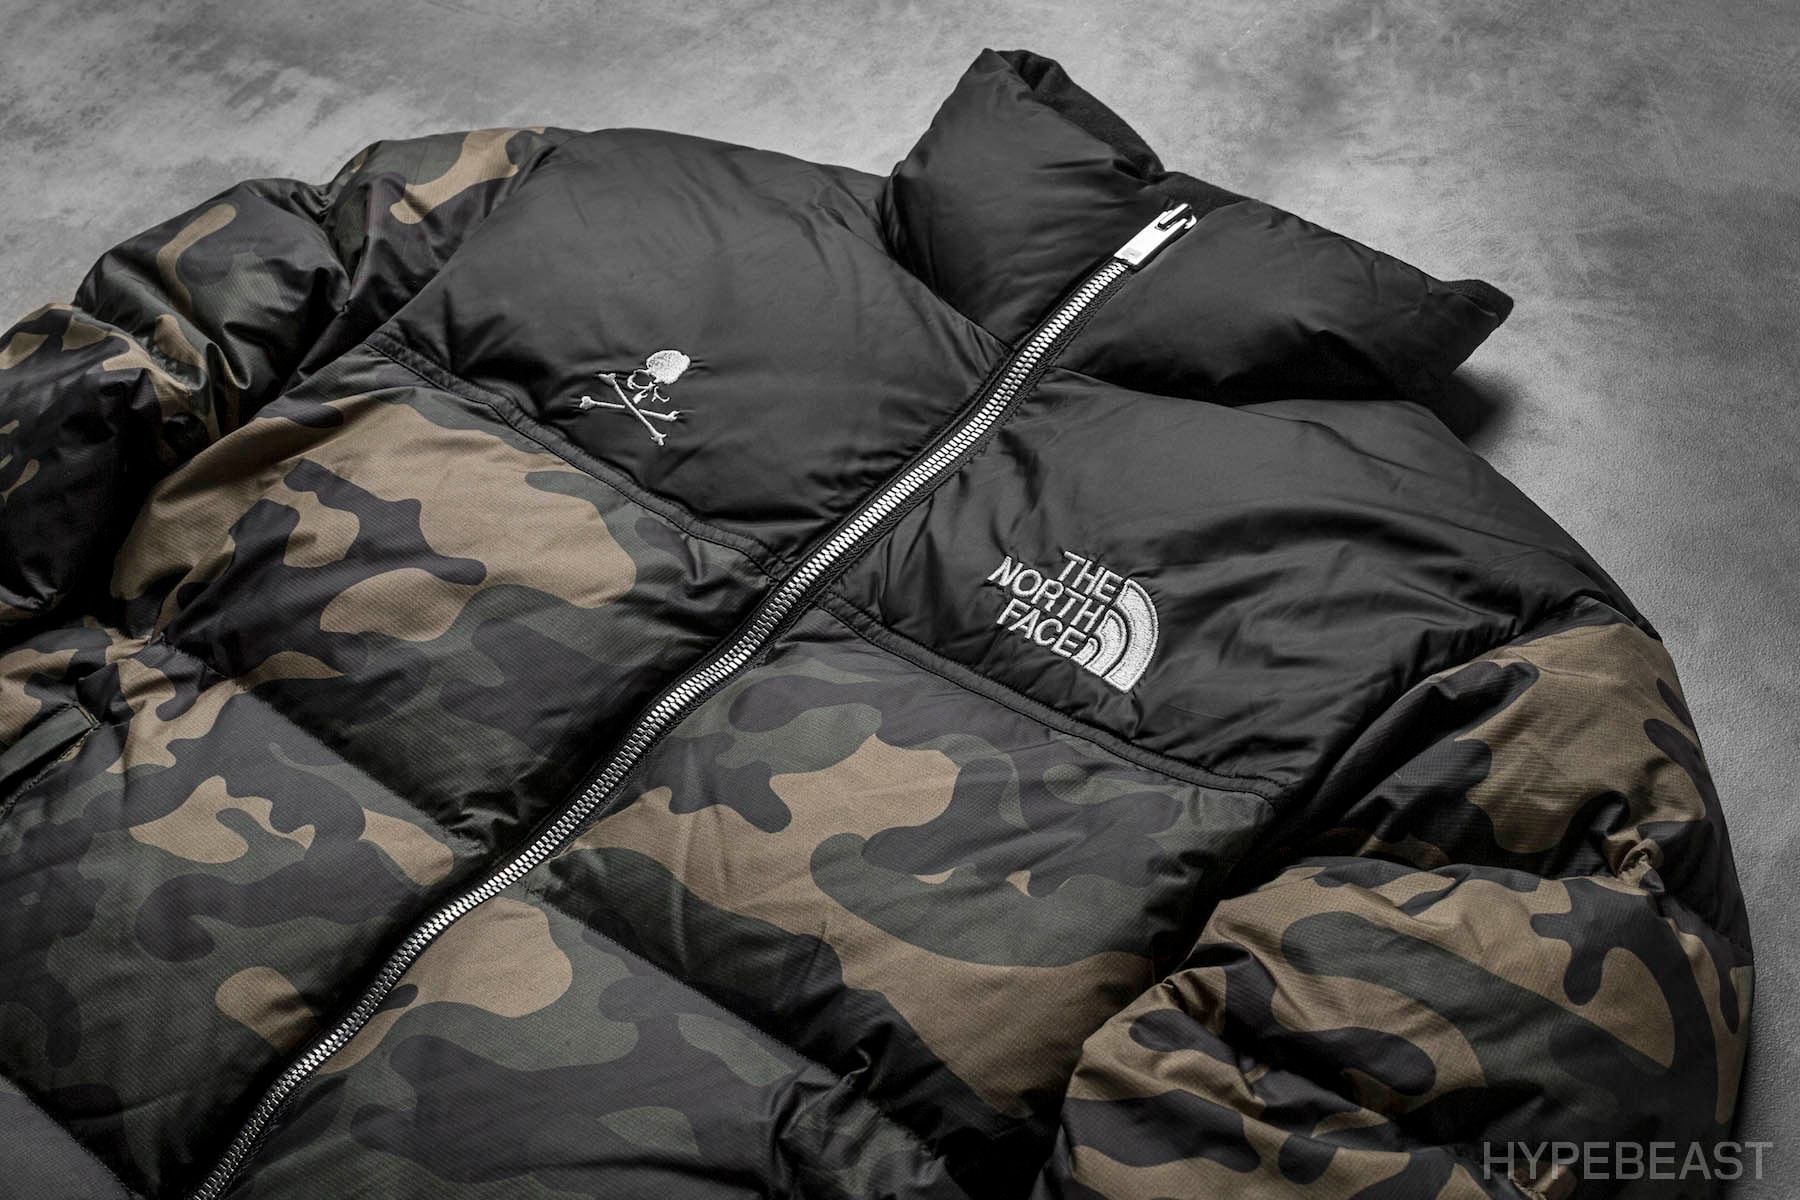 THE NORTH FACE Urban Exploration x mastermind WORLD Closer Look